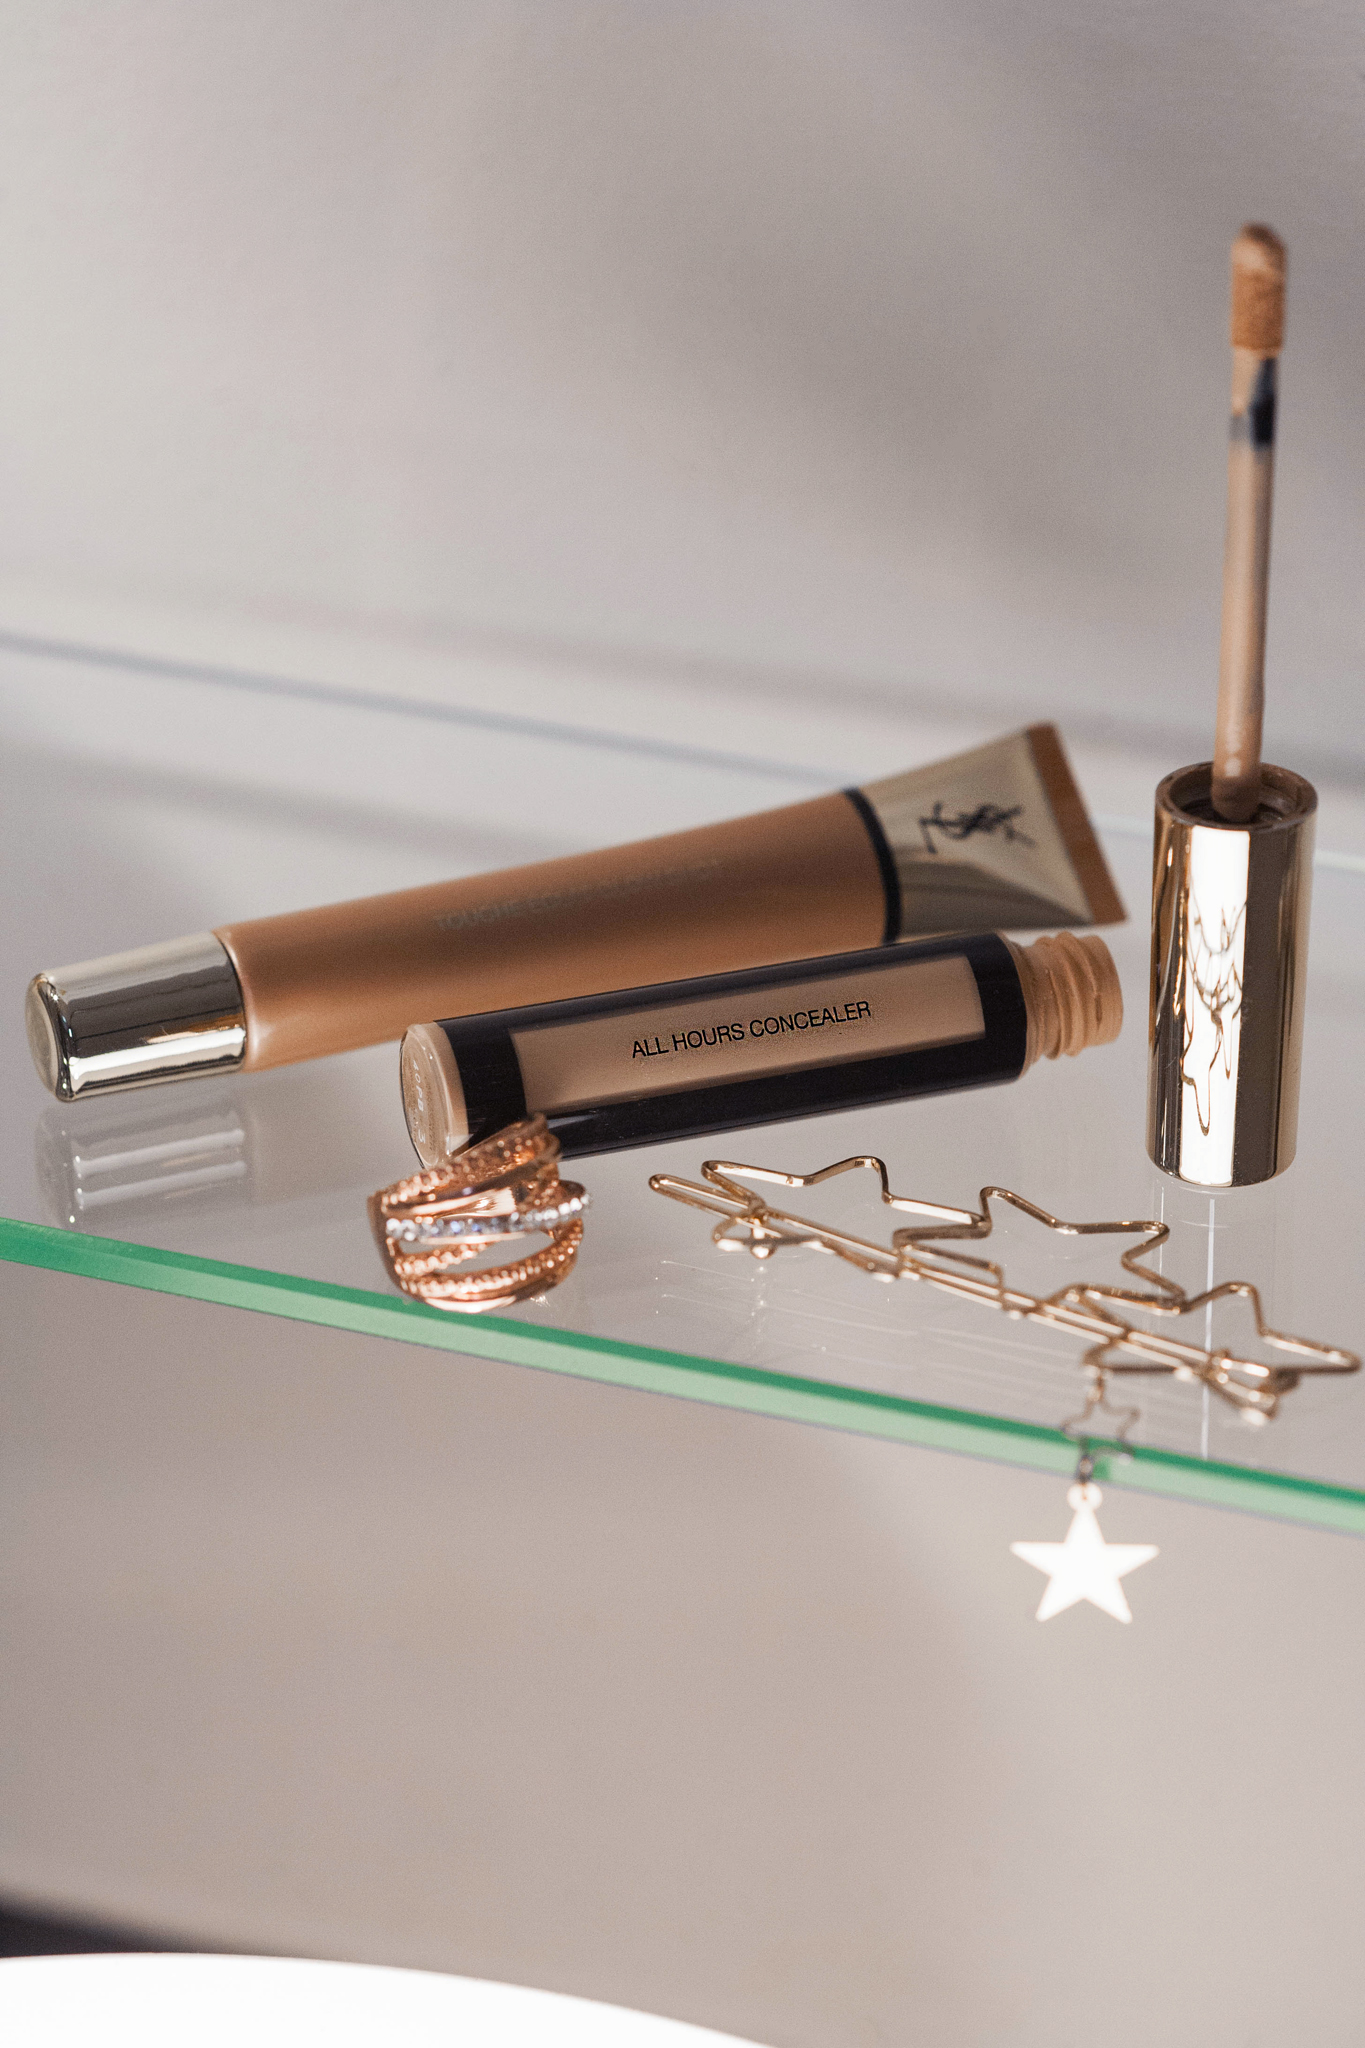 YSL Beauty All Hours Concealer